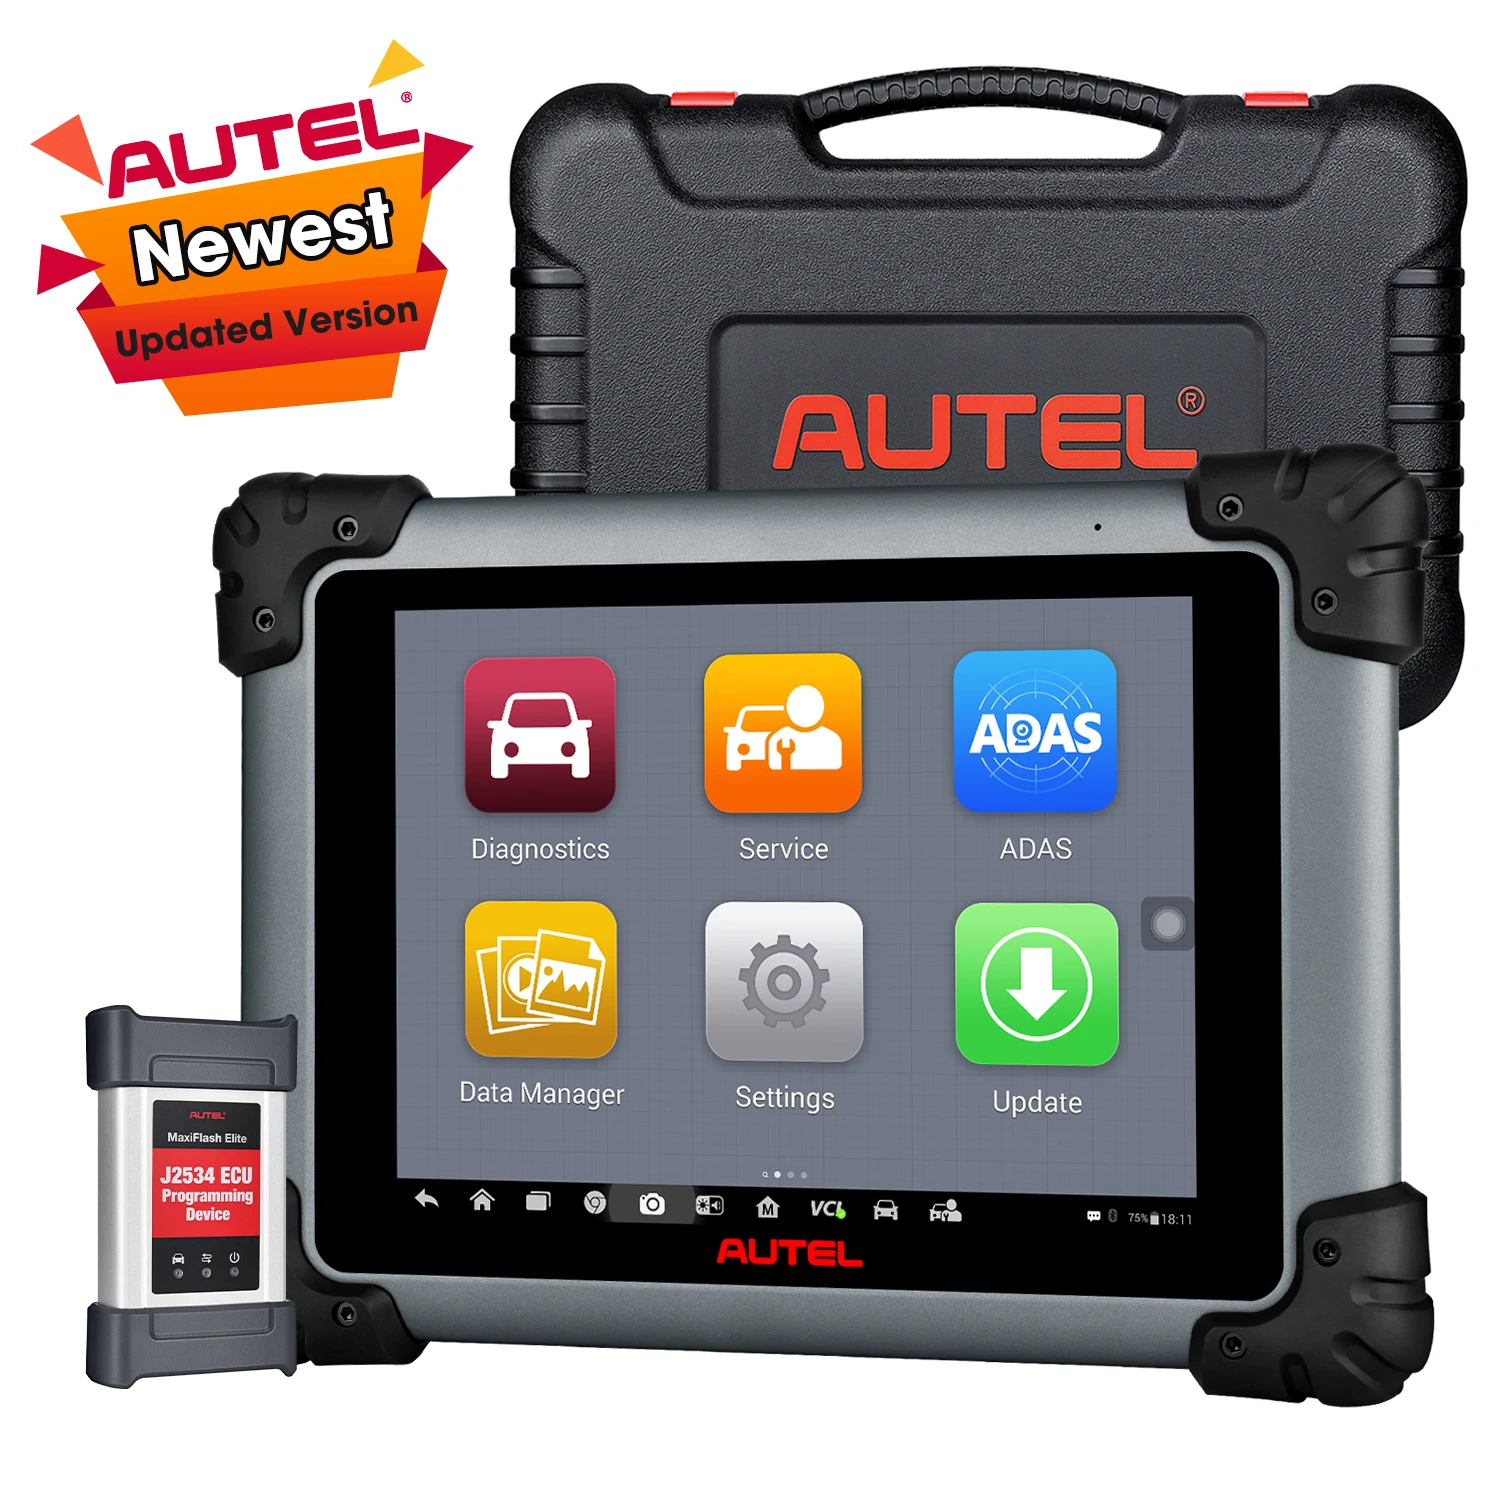 

Autel MaxiSys MS908S Pro II J2534 ECU Programming Vehicle Tools OBD2 Car Scanner for Mercedes device Better than MK908P